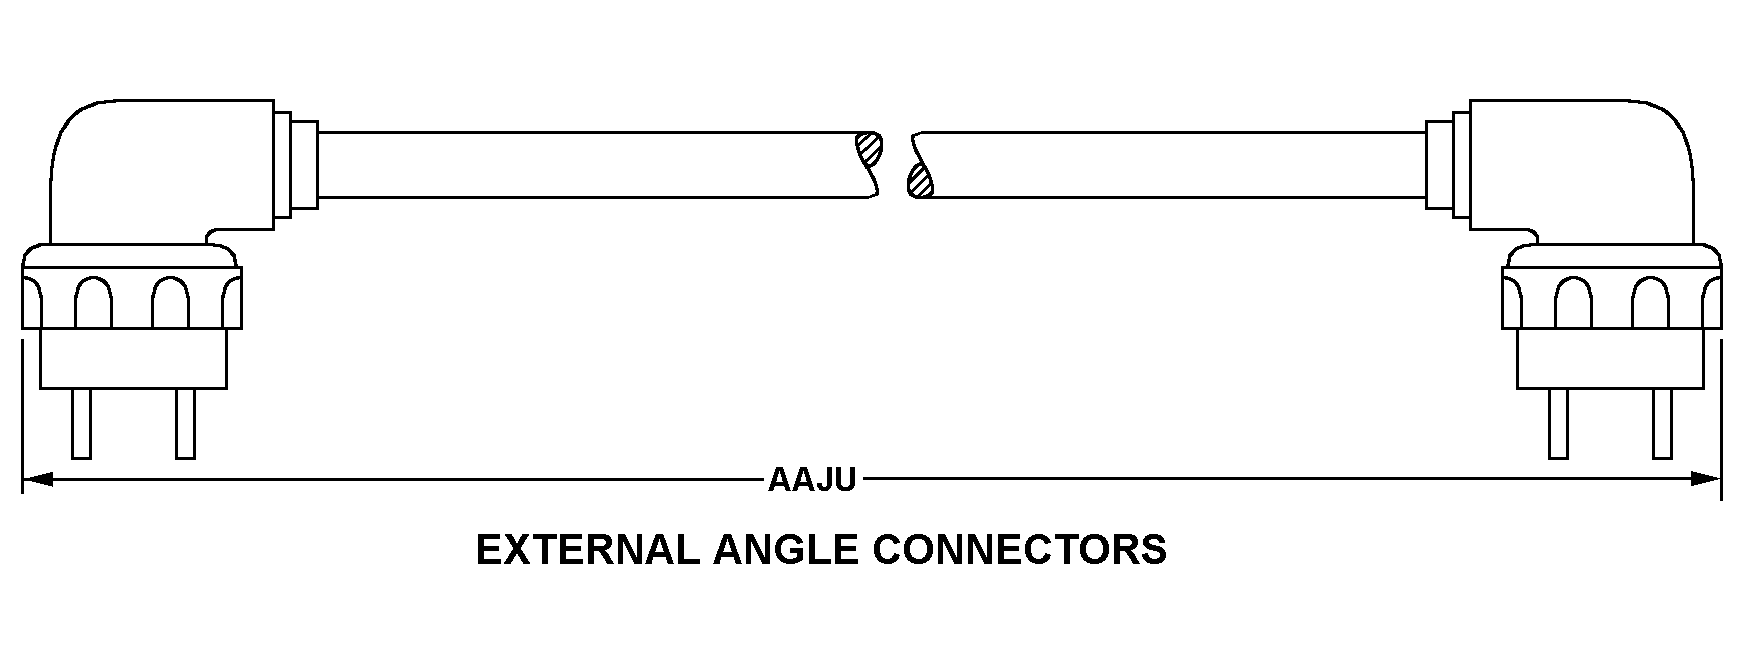 EXTERNAL ANGLE CONNECTORS style nsn 6150-01-308-1931